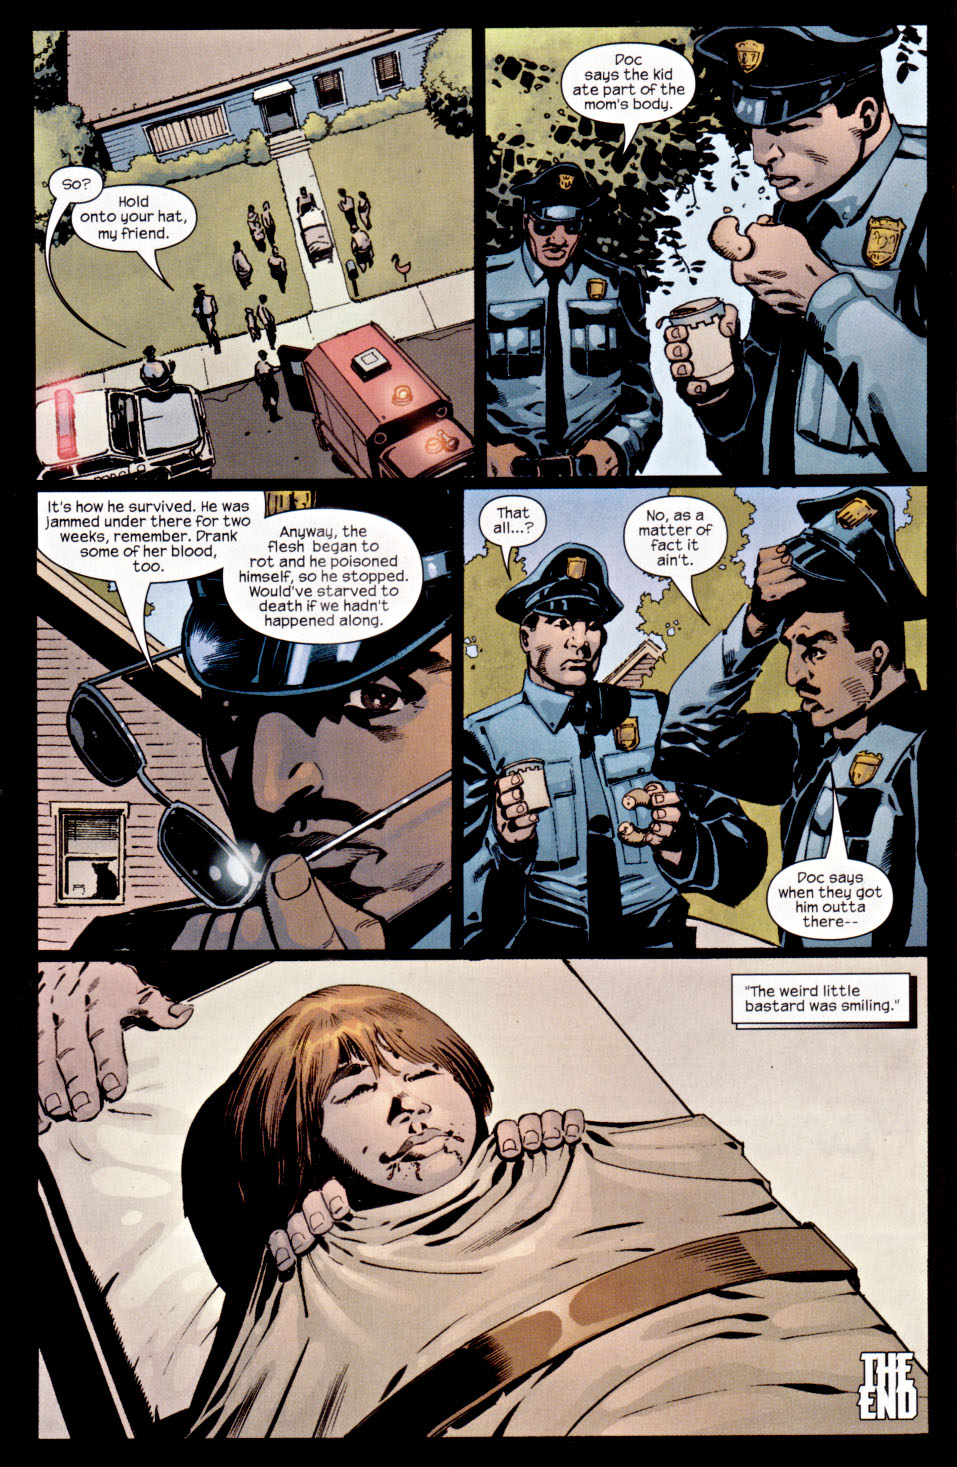 The Punisher (2001) issue 26 - Hidden #03 - Page 23